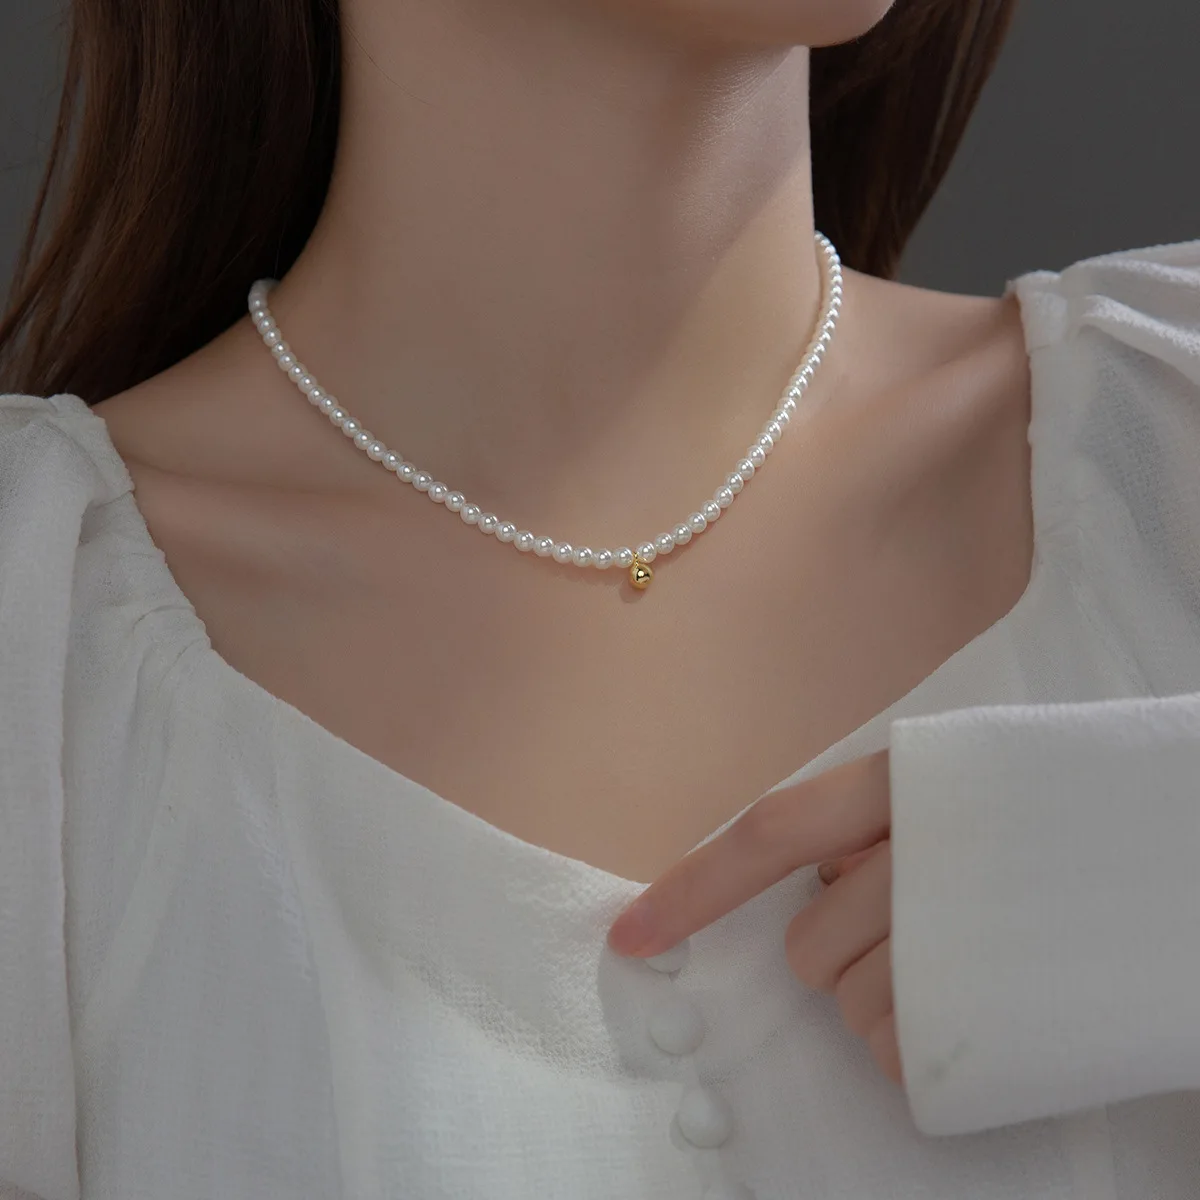 

42cm Pearls Necklace For Women On Neck Silver 925 Necklaces Women Bean Pendant Girls Fashion Jewelry Synthesis Pearl Minimalist